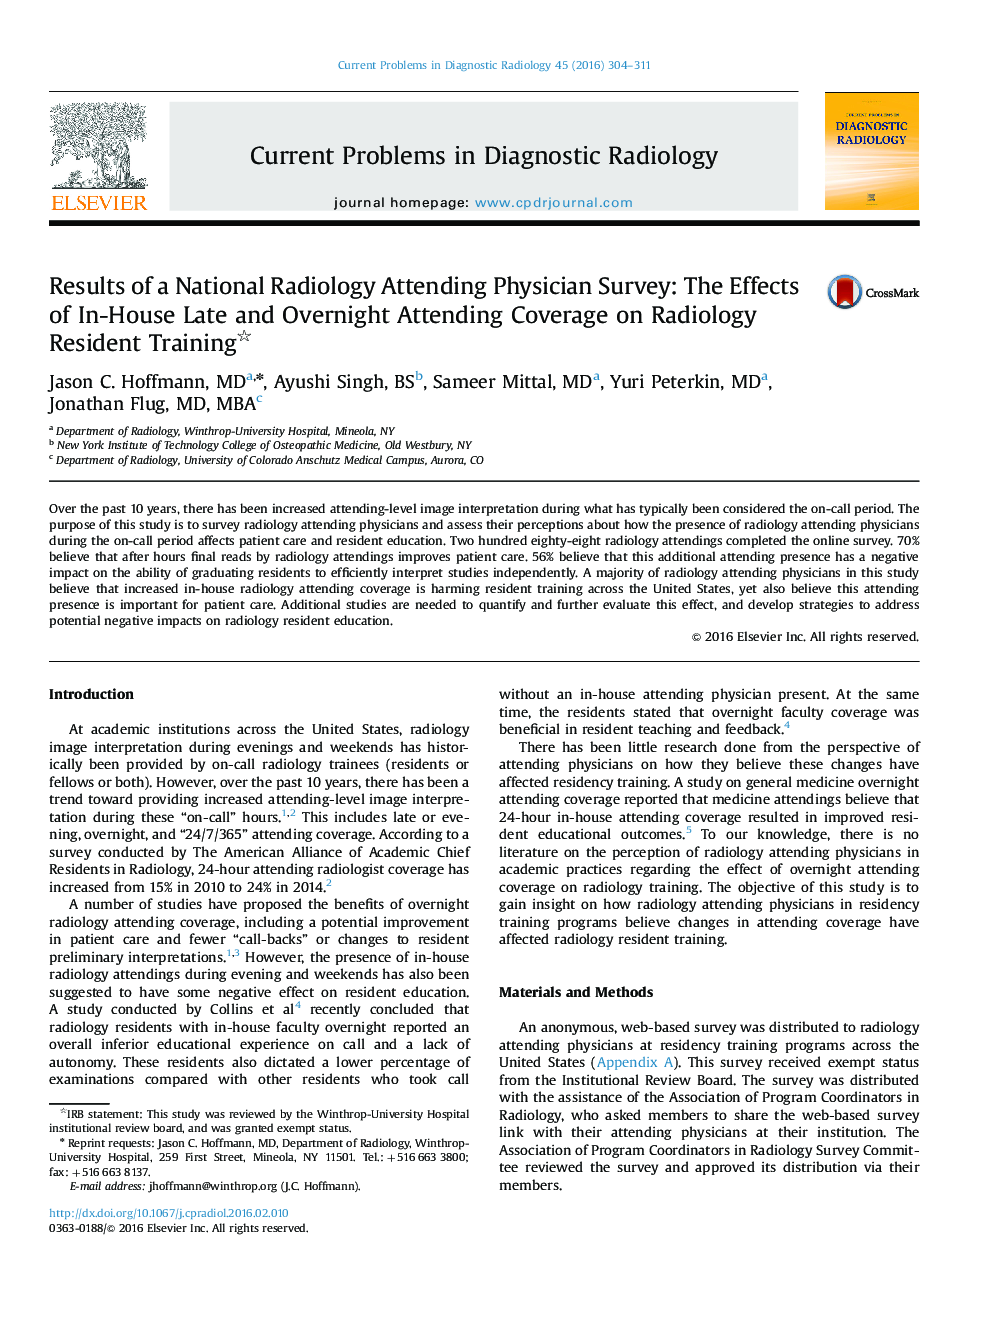 Results of a National Radiology Attending Physician Survey: The Effects of In-House Late and Overnight Attending Coverage on Radiology Resident Training 